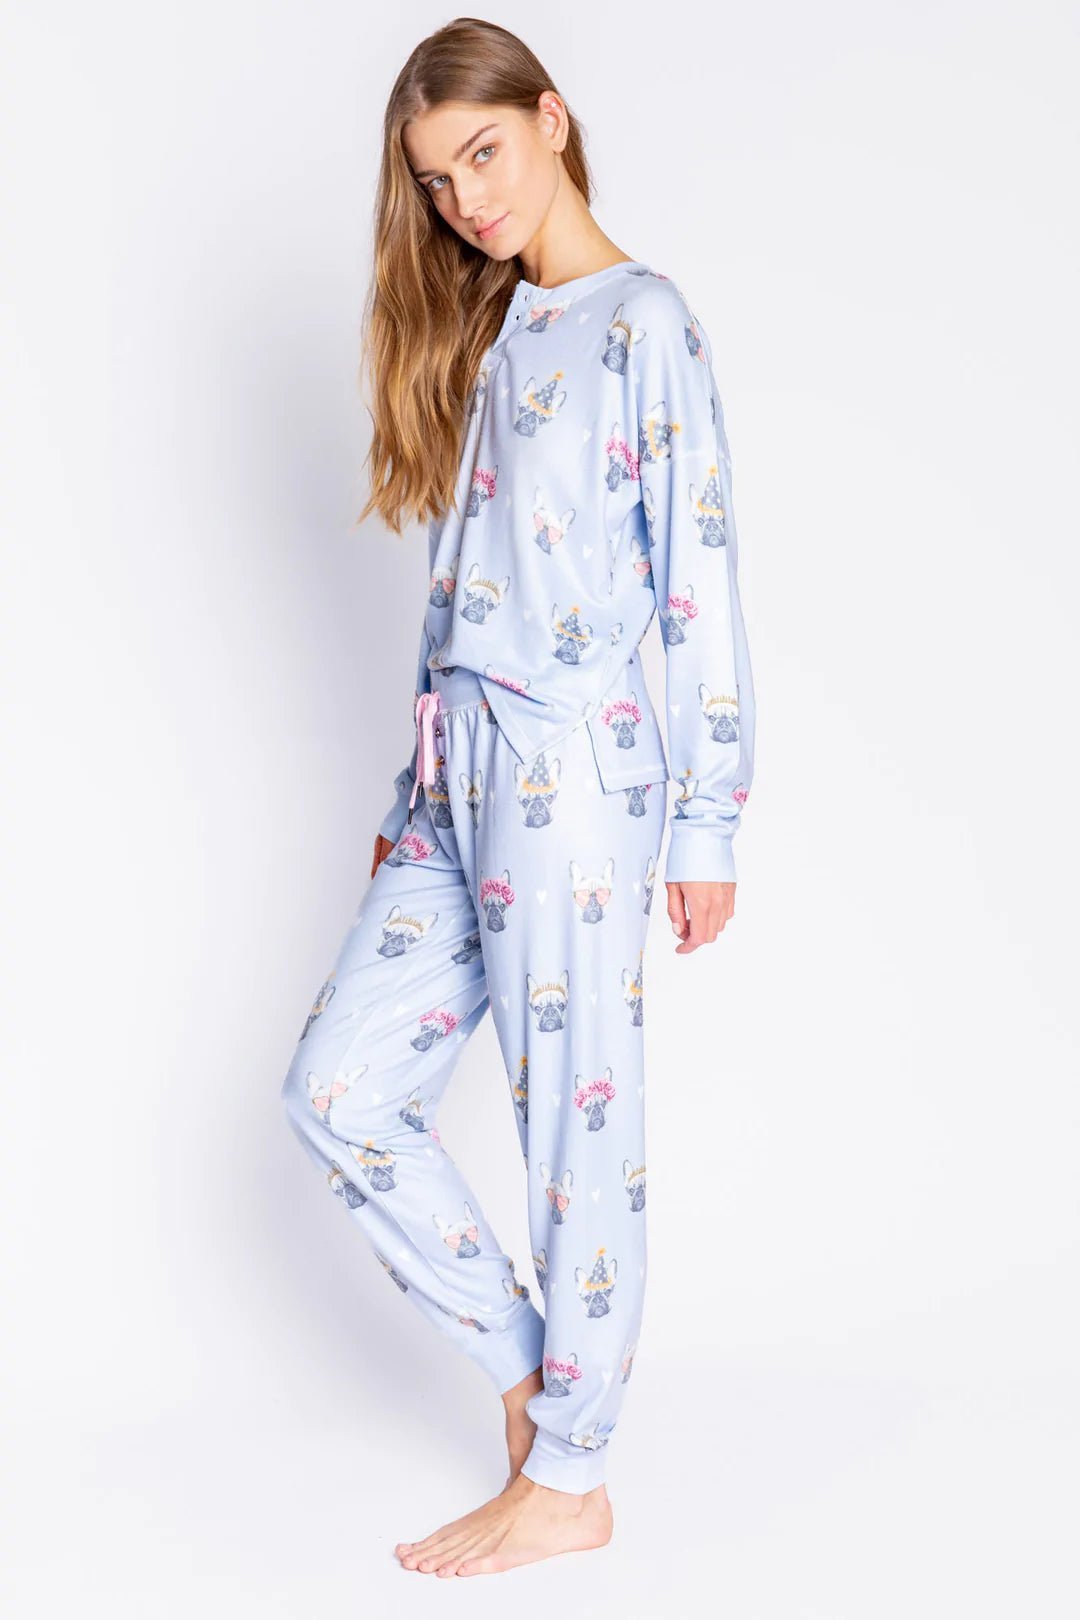 Shop PJ Salvage The Frenchie Life Jammie Set as seen on Chloe Sims - Premium Pyjamas from PJ Salvage Online now at Spoiled Brat 